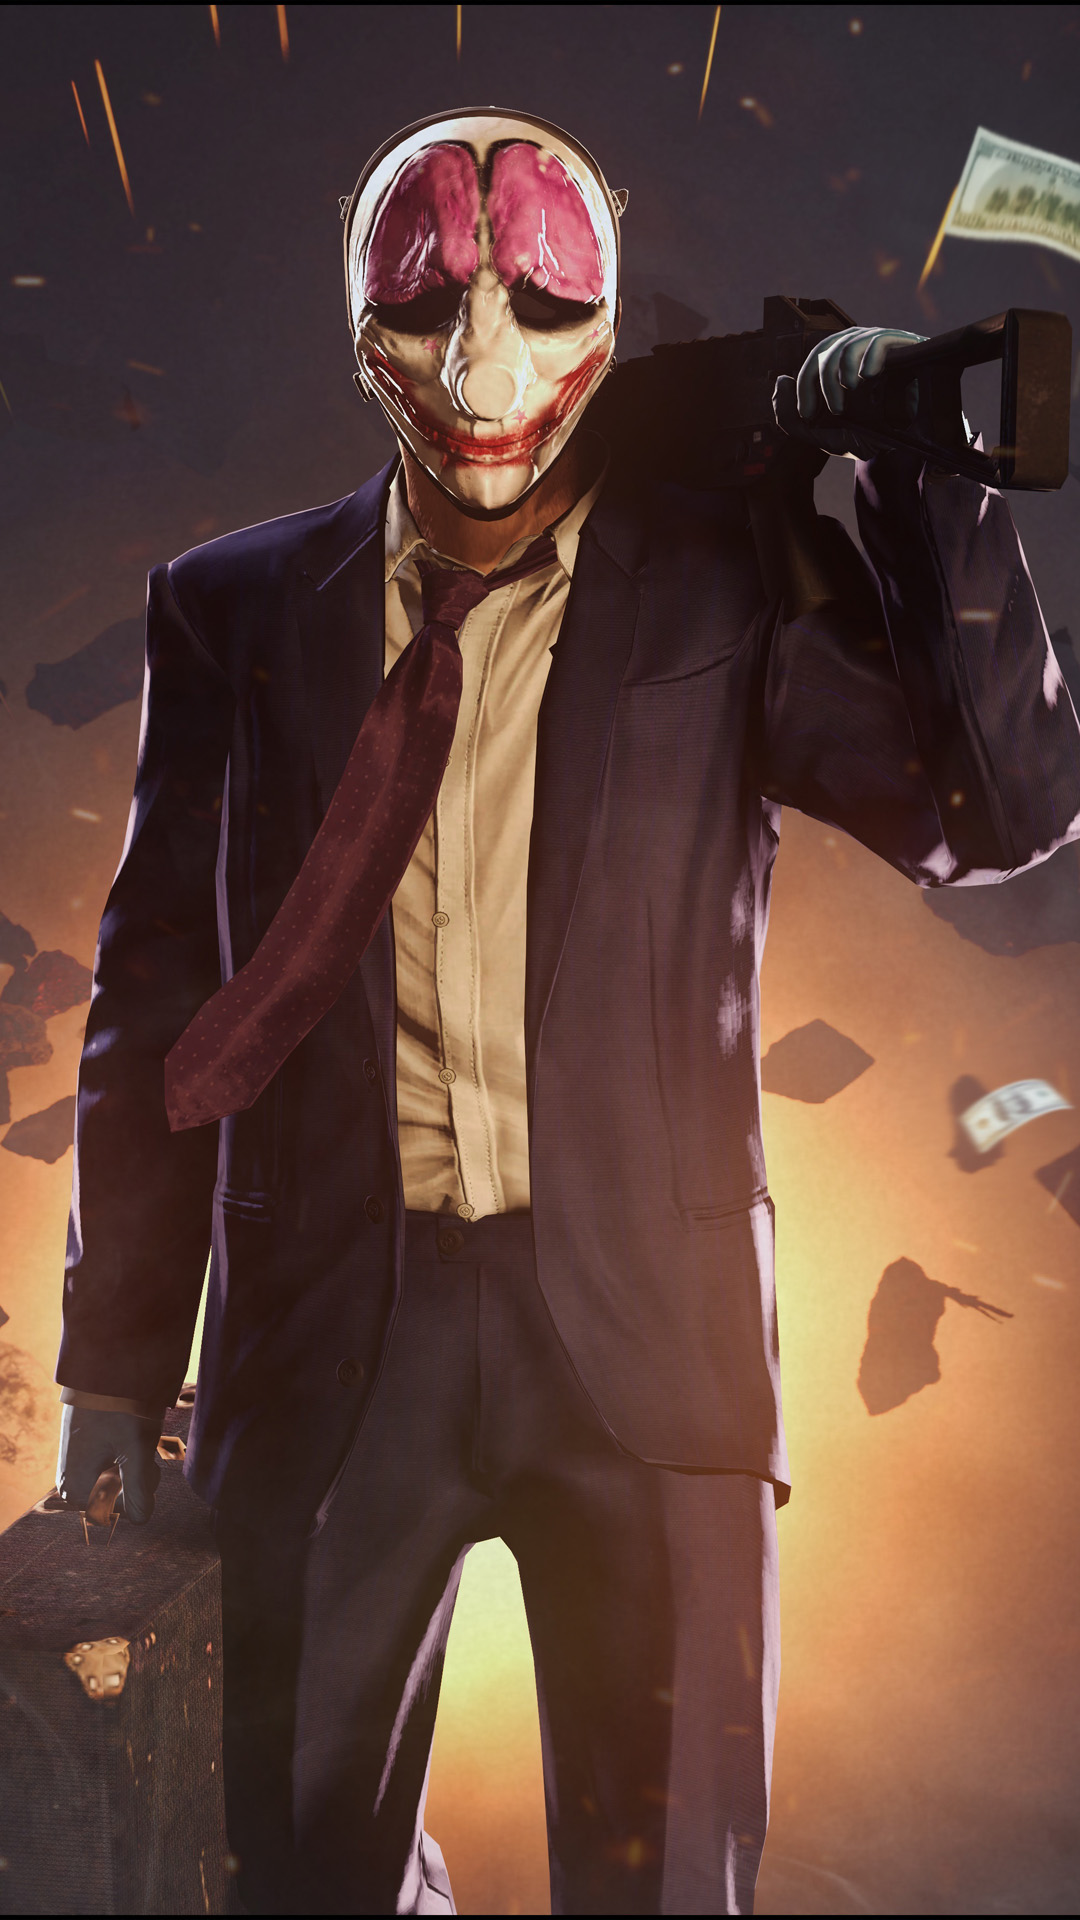 download payday 2 ps4 for free